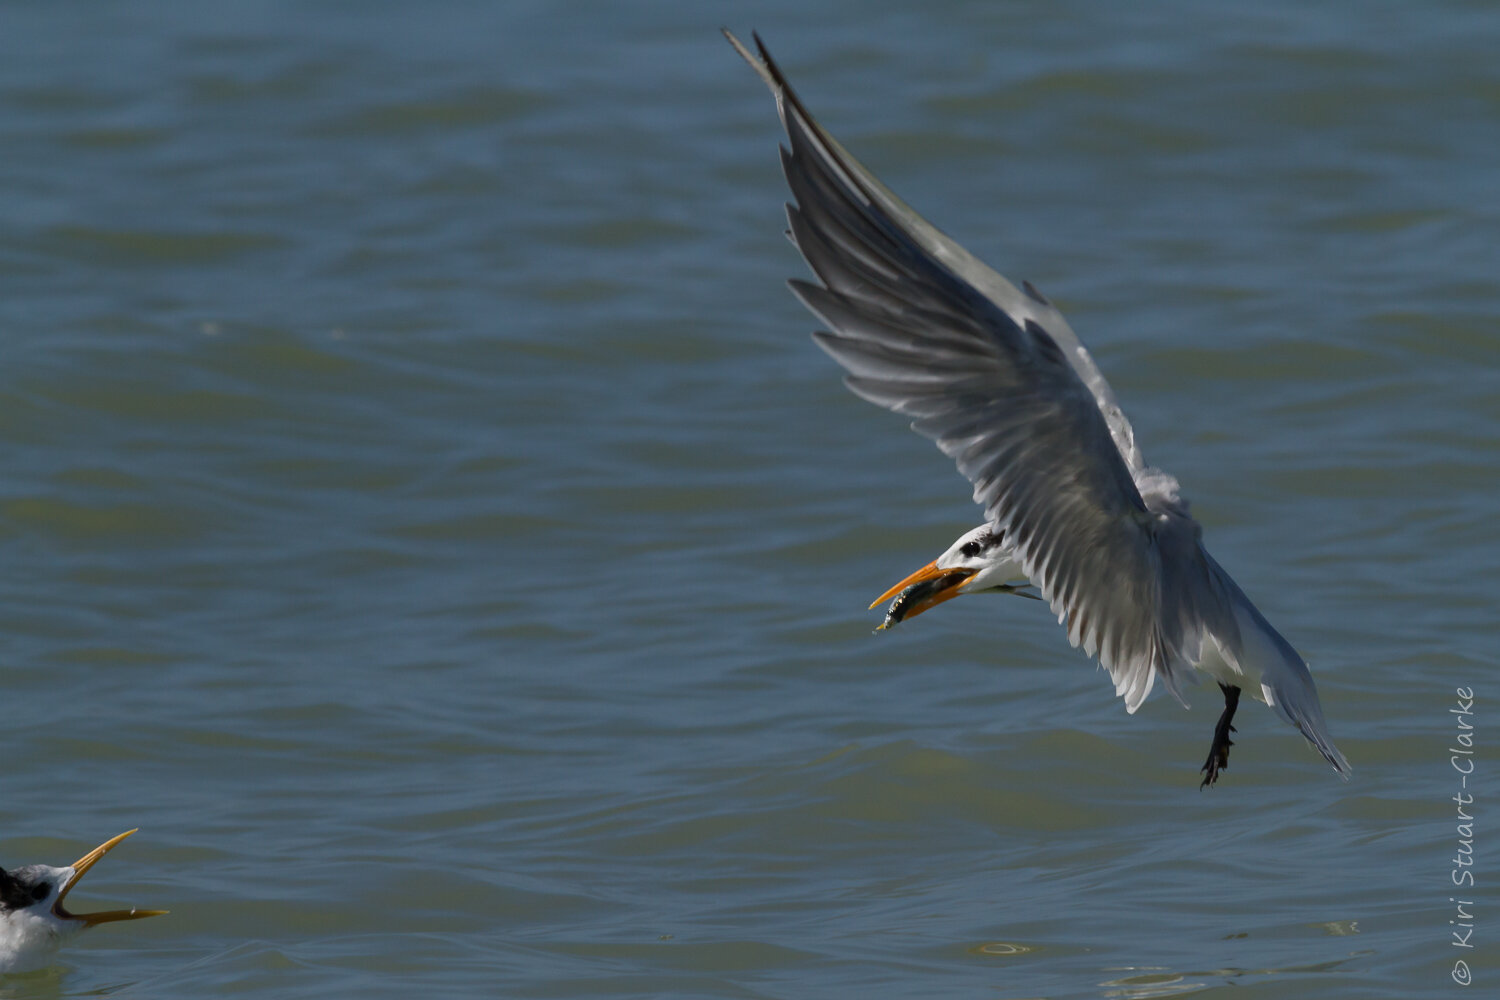  Adult tern returning to young with fish 